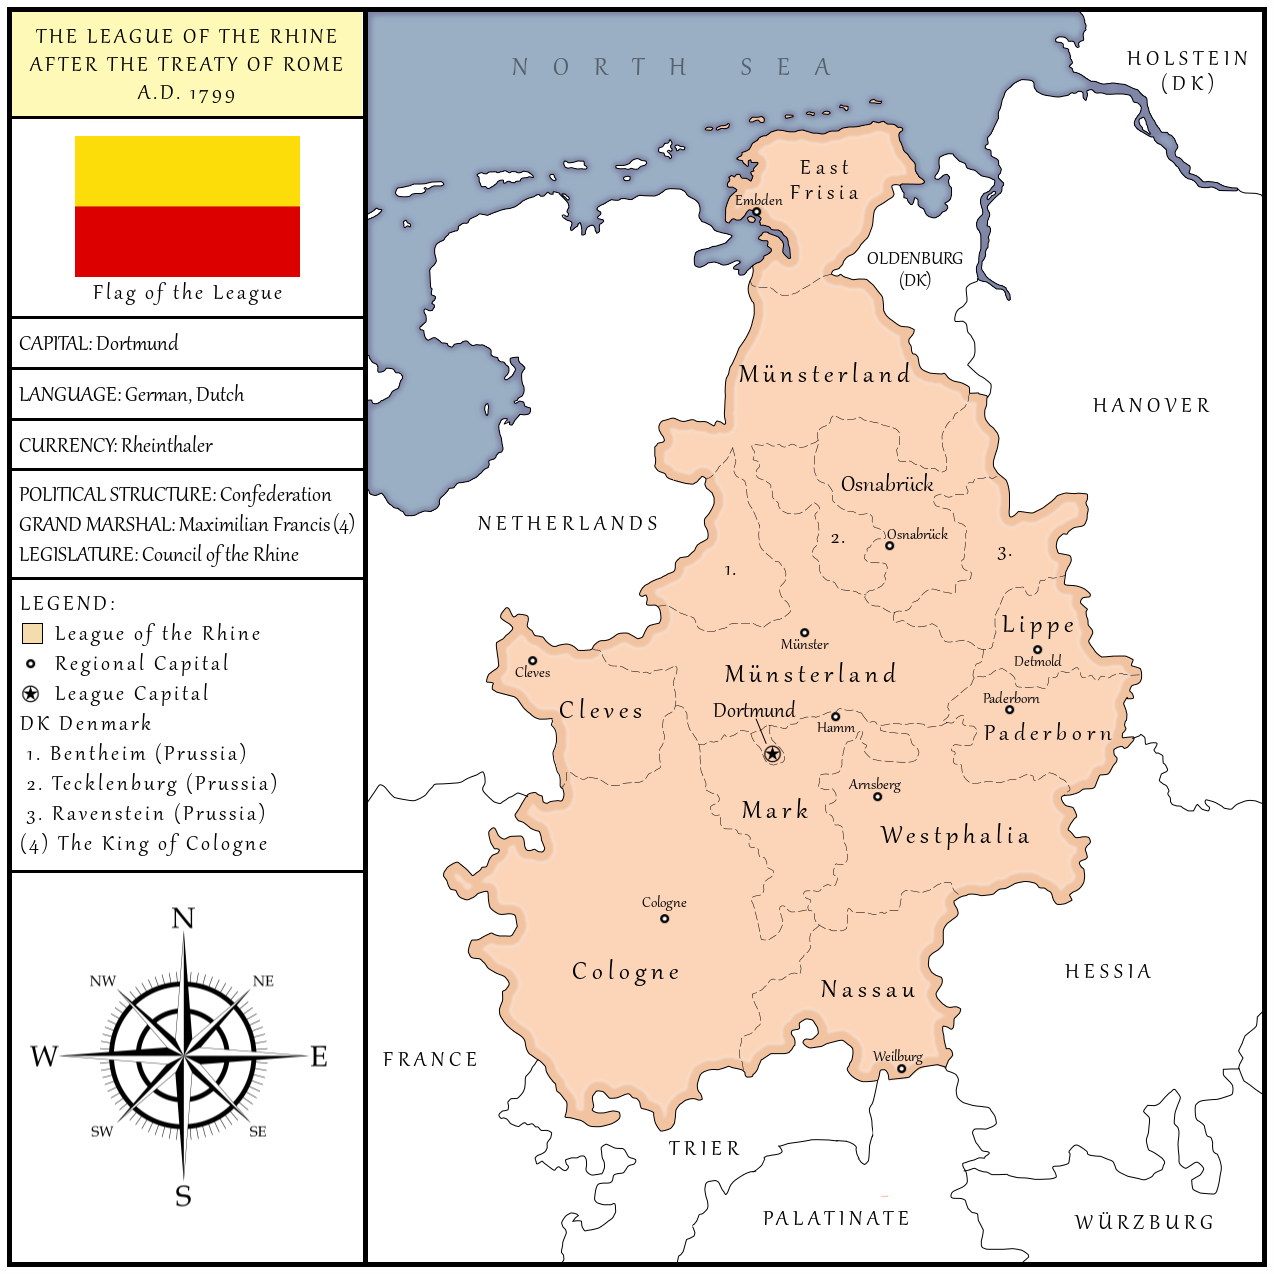 disaster_at_leuthen__the_league_of_the_rhine_1799_by_rarayn-d4zlpv9.png